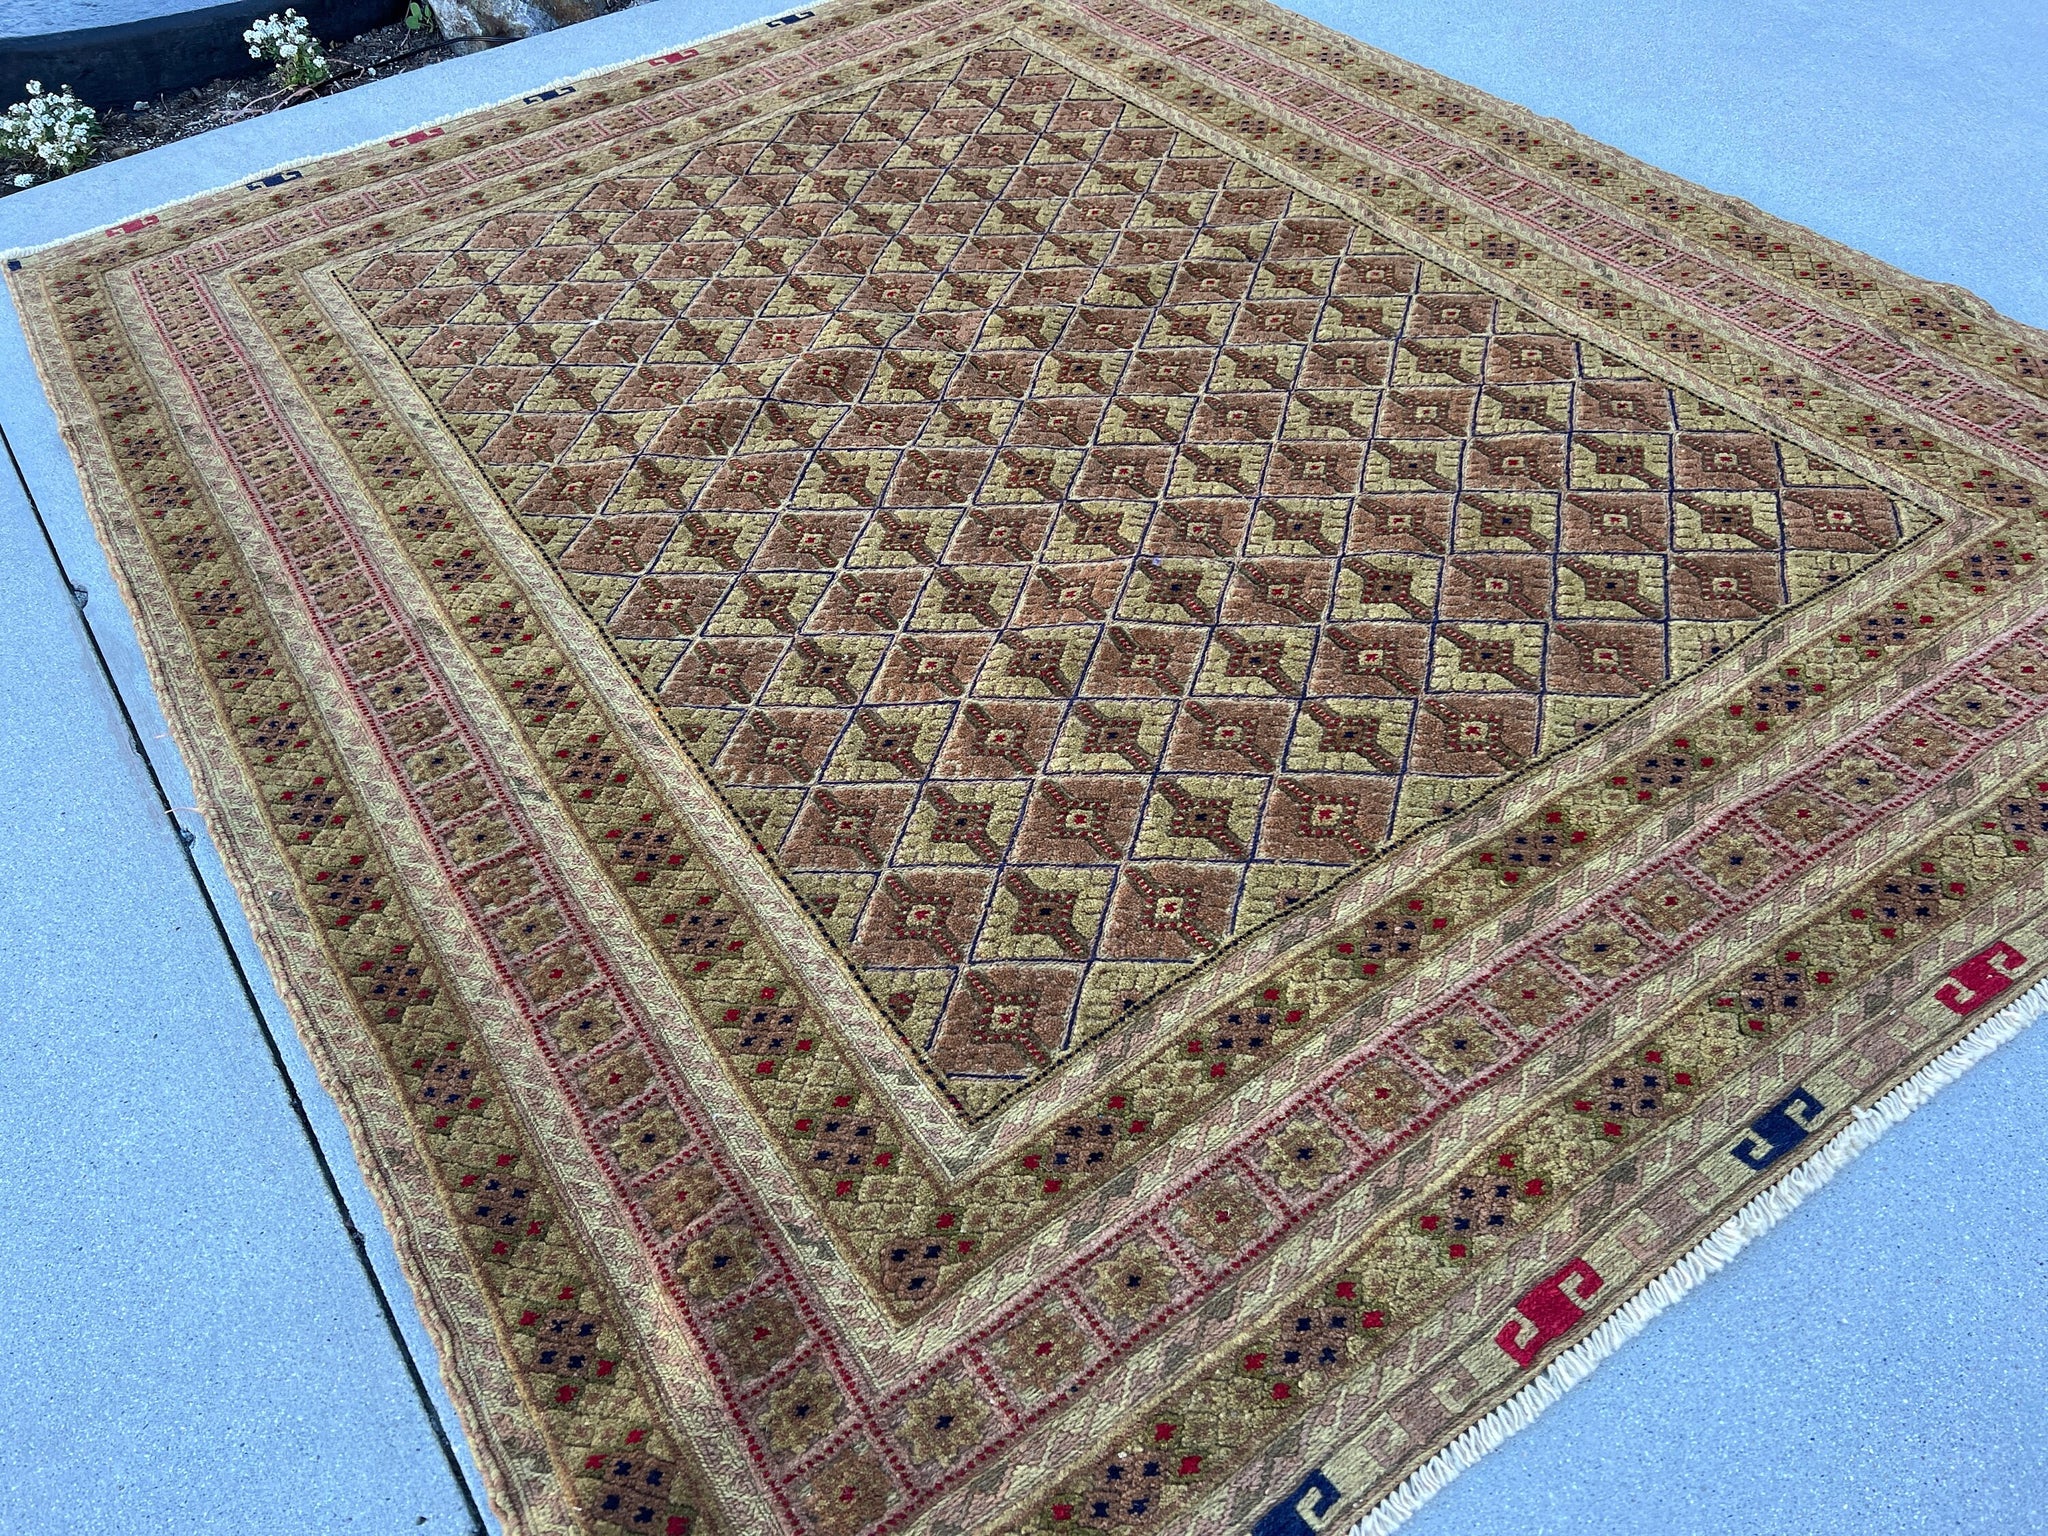 5x6 (150x180) Handmade Afghan Rug | Olive Green Crimson Red Chocolate Mocha Golden Brown Yellow | Hand Knotted Geometric Wool Persian